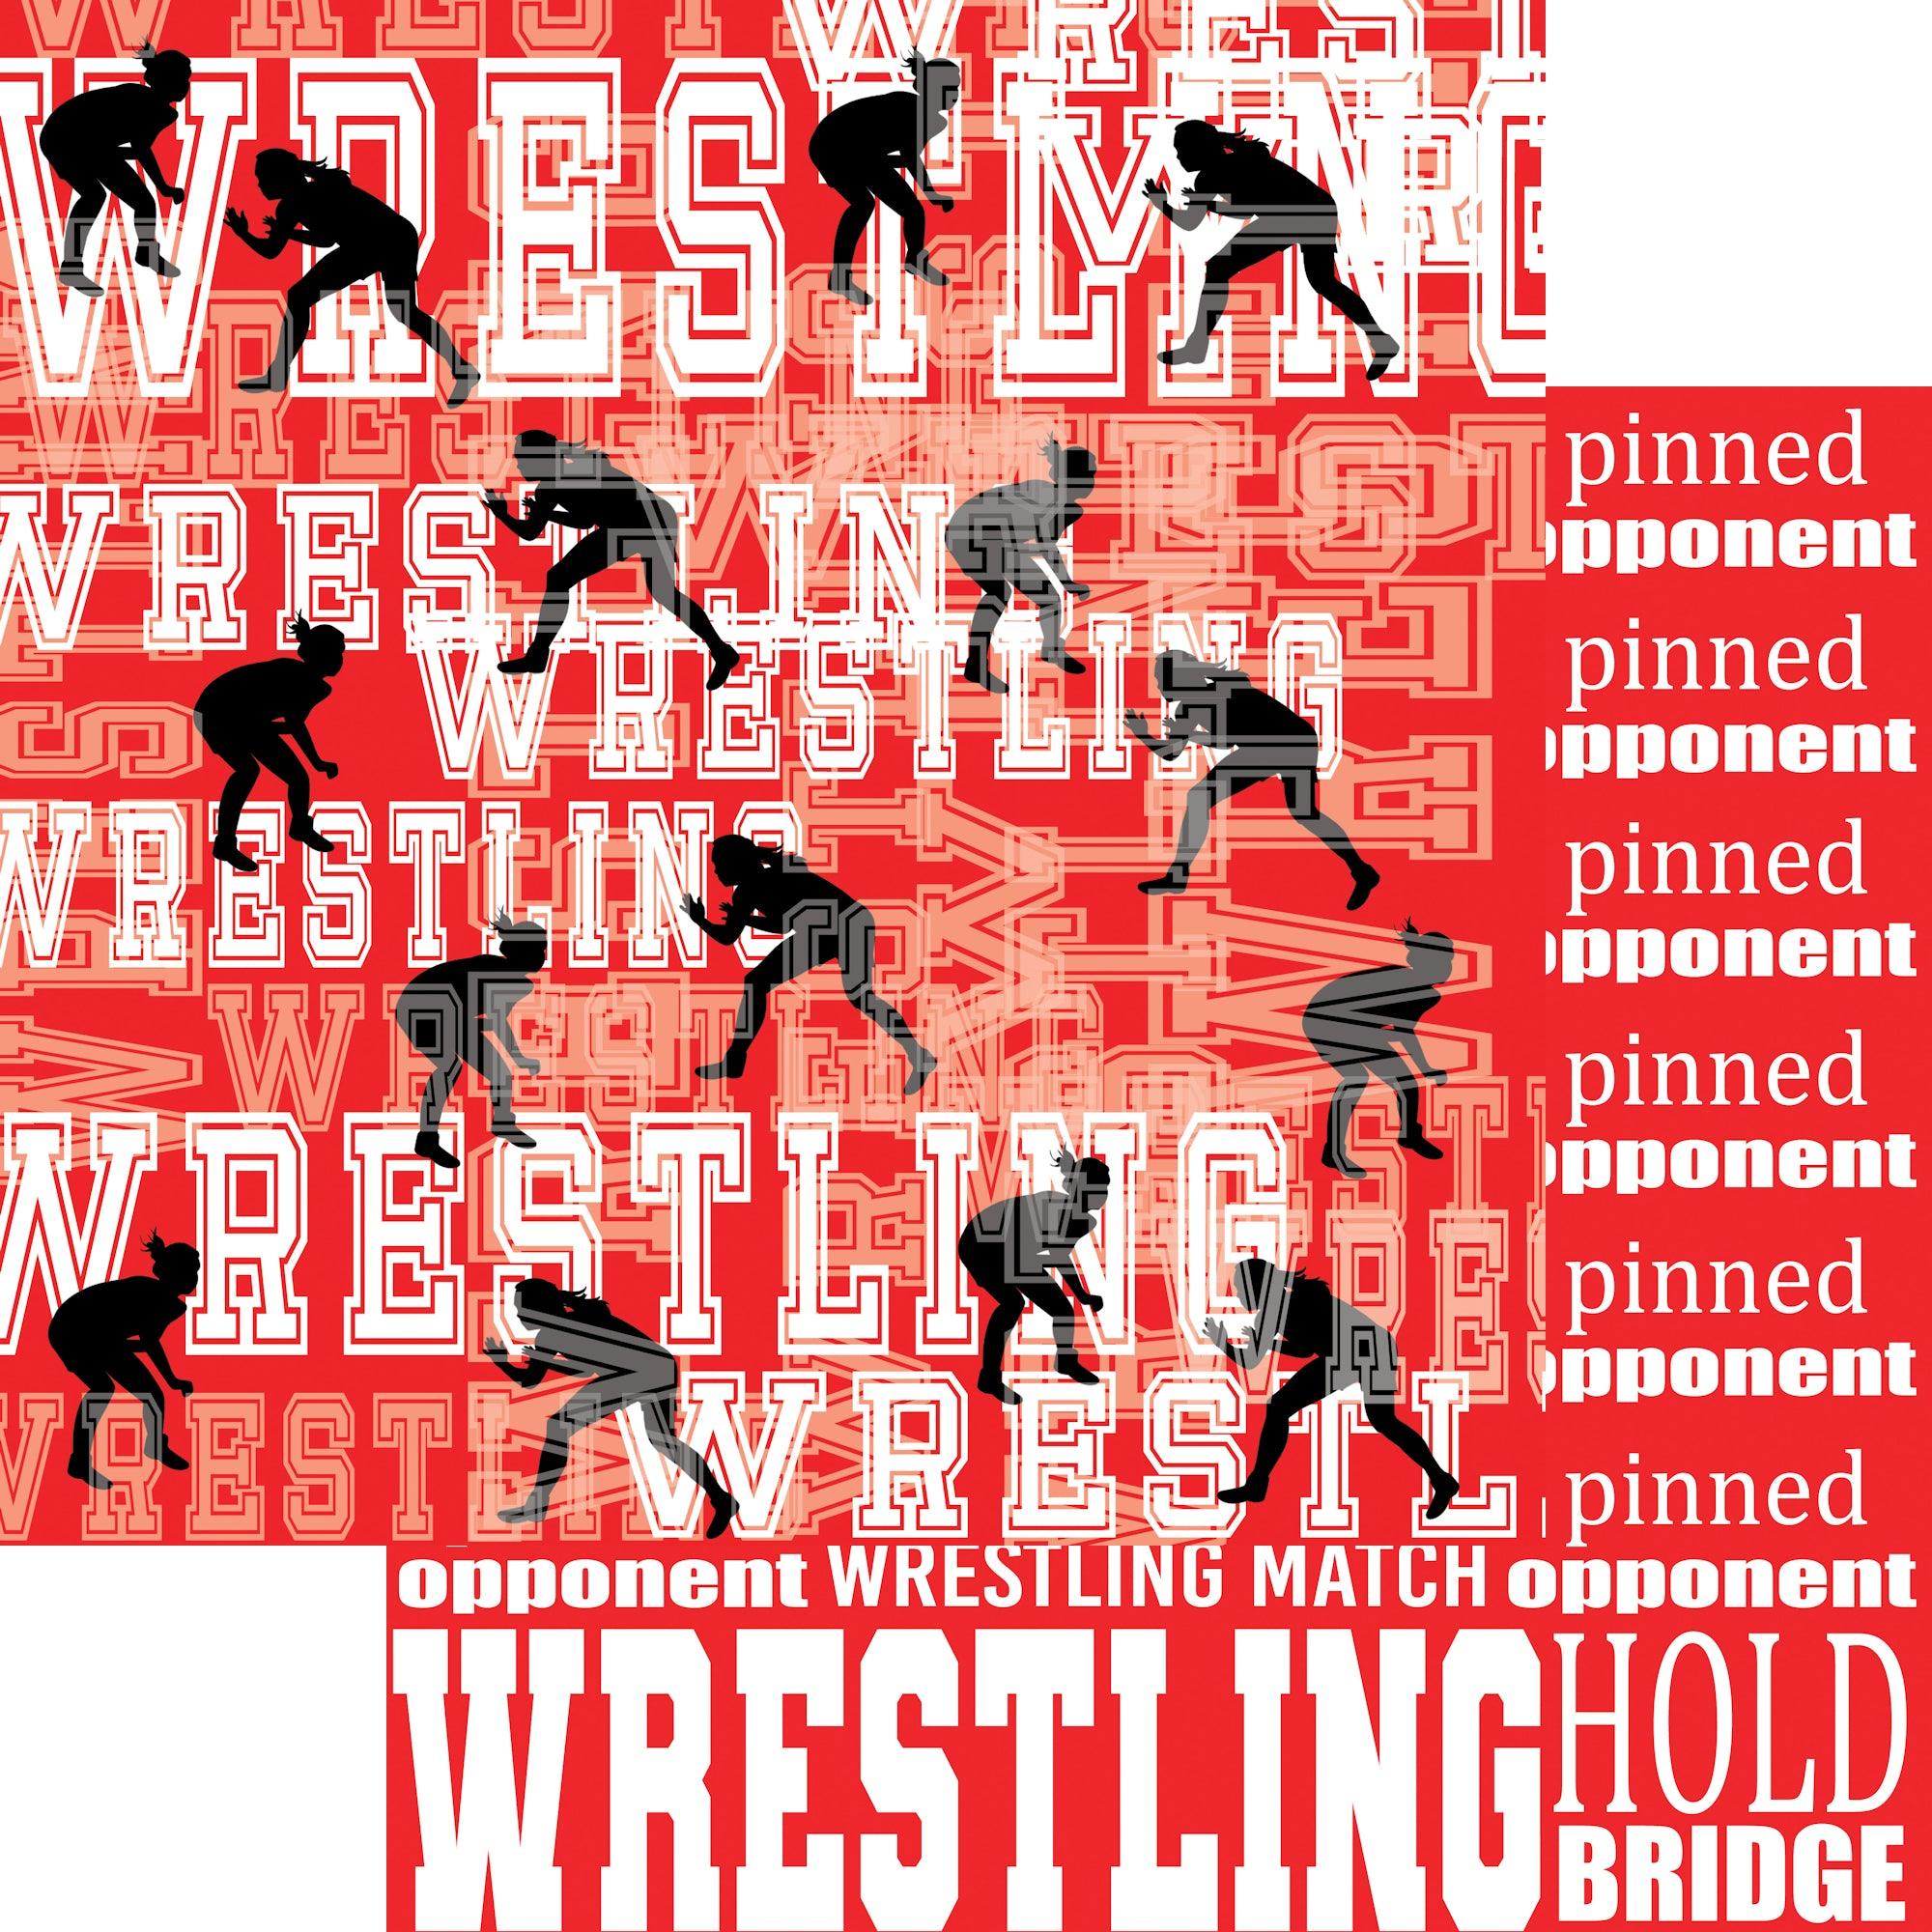 Female Wrestling Collection Wrestling Collage 12 x 12 Double-Sided Scrapbook Paper by SSC Designs - Scrapbook Supply Companies